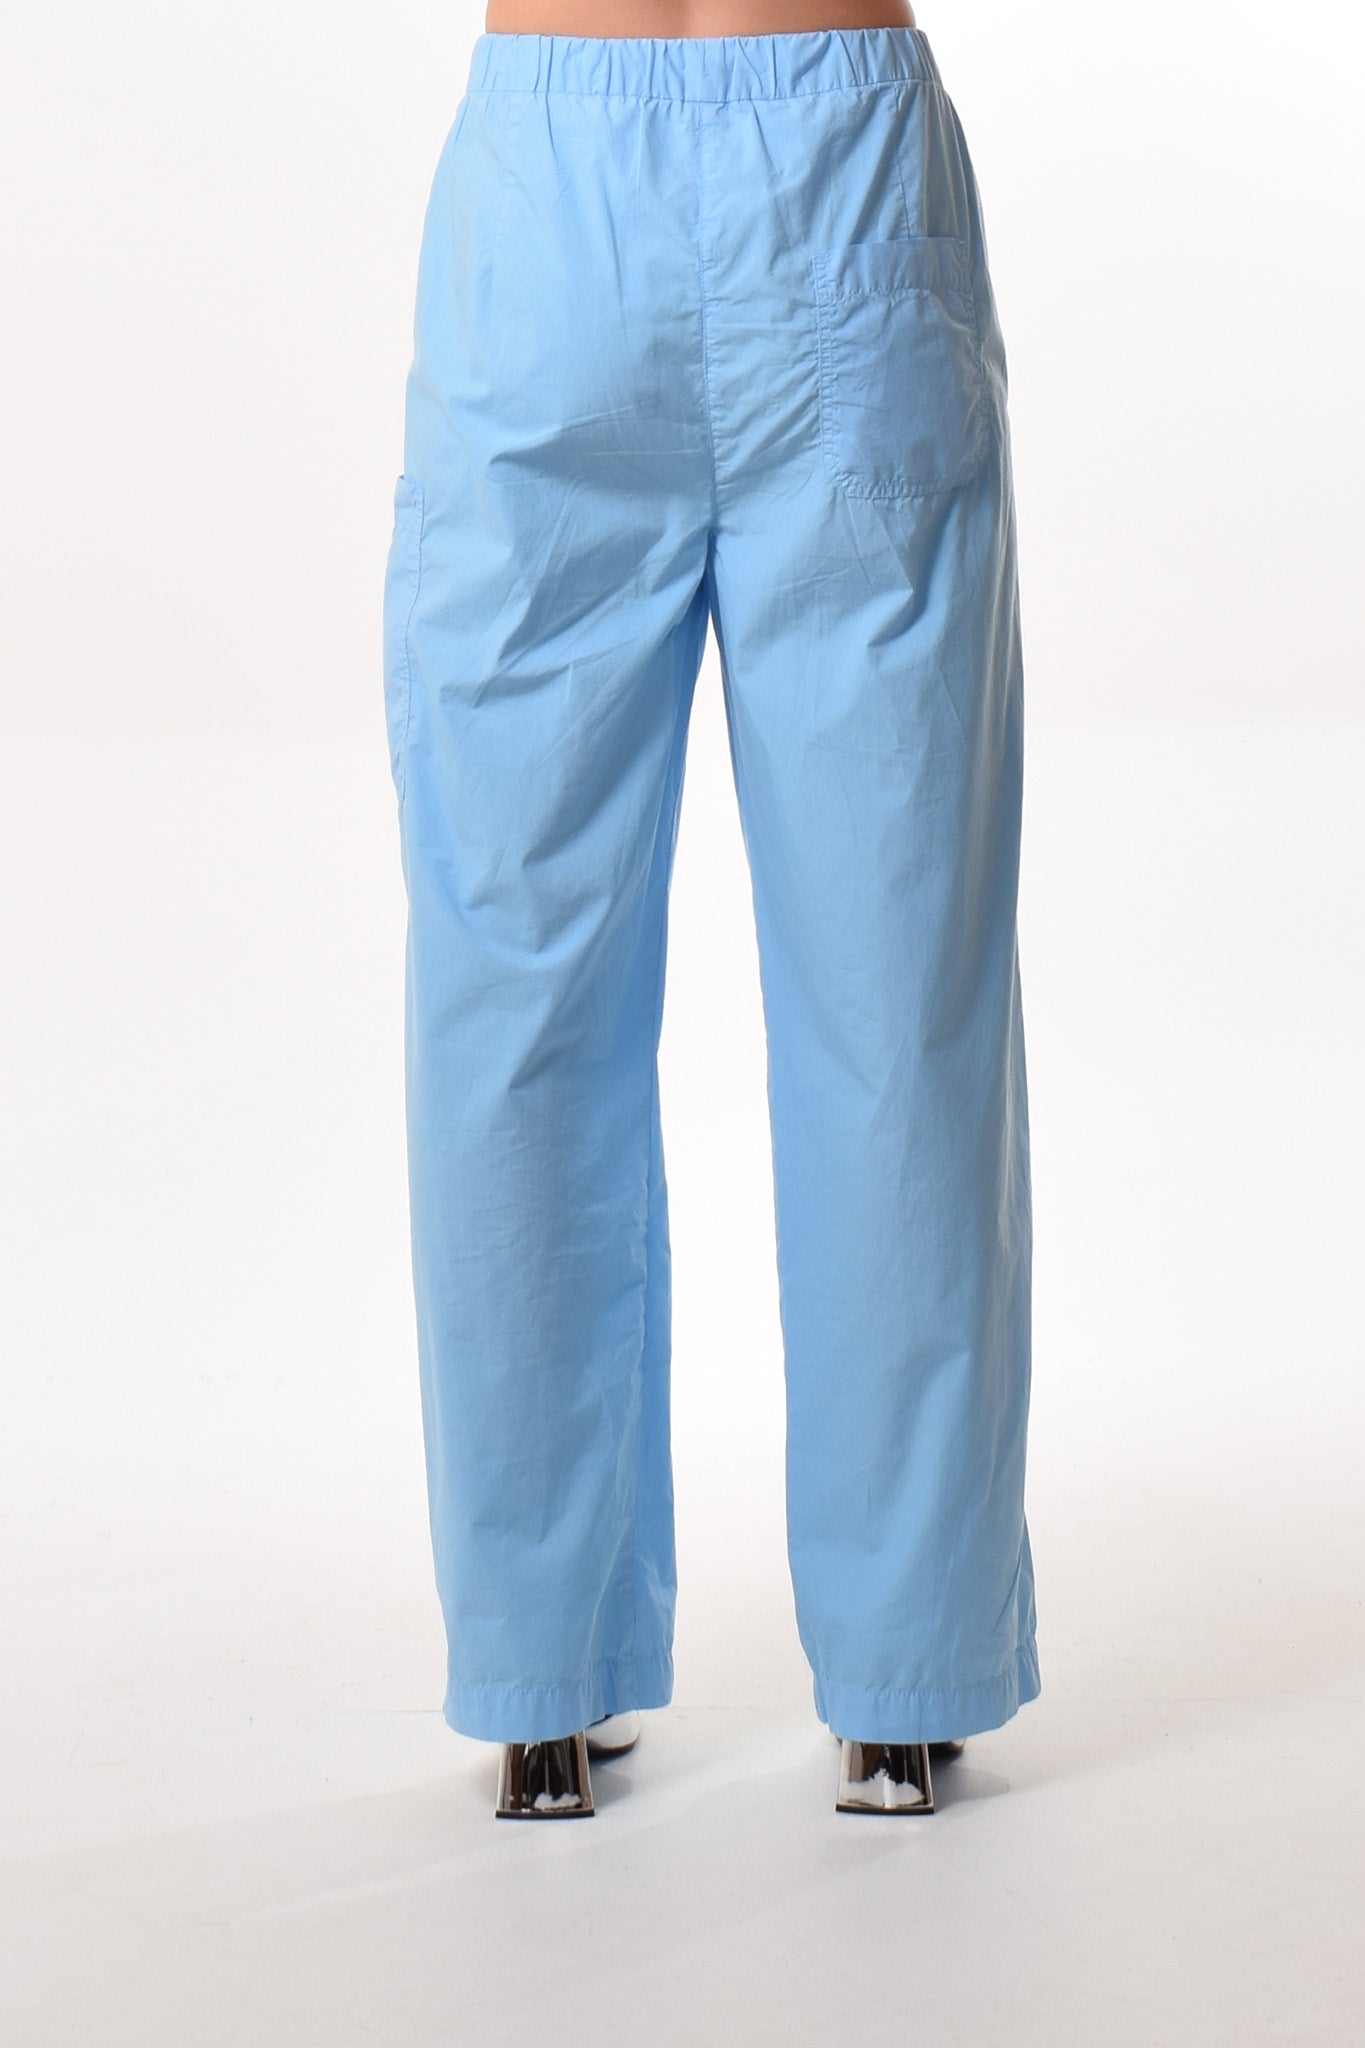 Madison trousers in Sky (cotton)